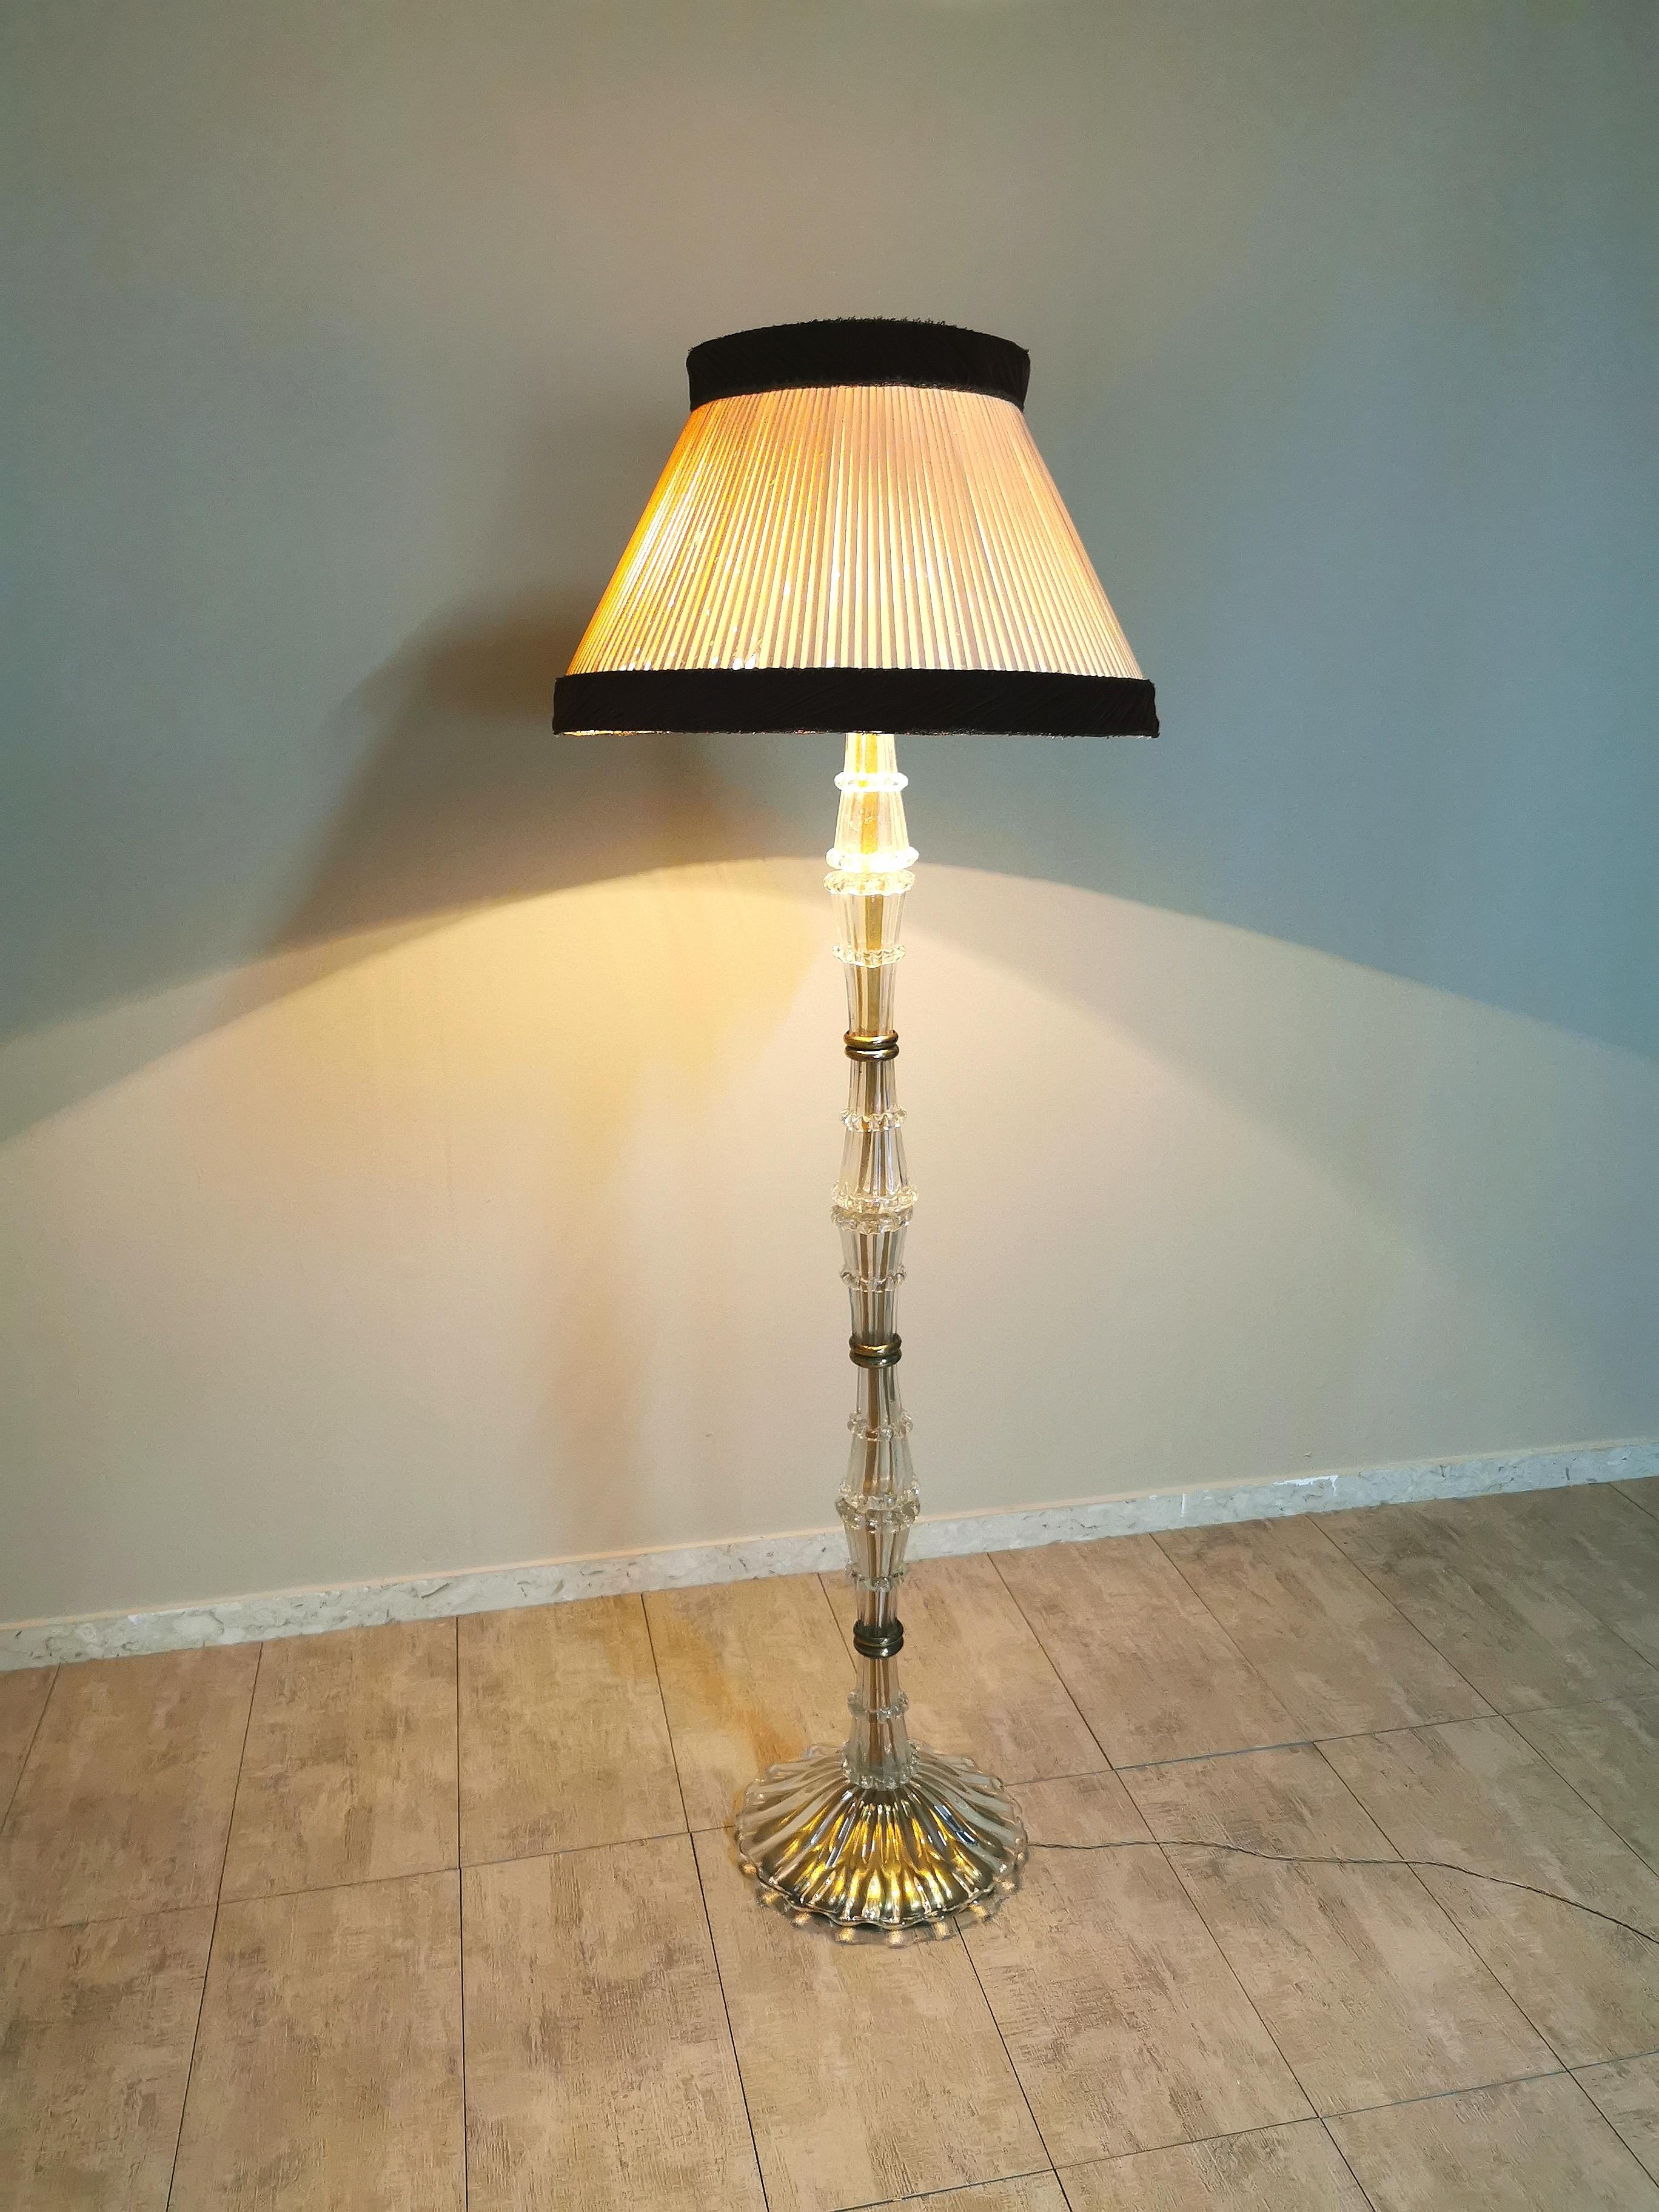 Elegant floor lamp attributable to Ercole Barovier produced in Italy in the 1940s. The lamp is characterized by a long stem made entirely of transparent Murano glass as well as the base with brass accessories and diffuser in silk and burgundy velvet.